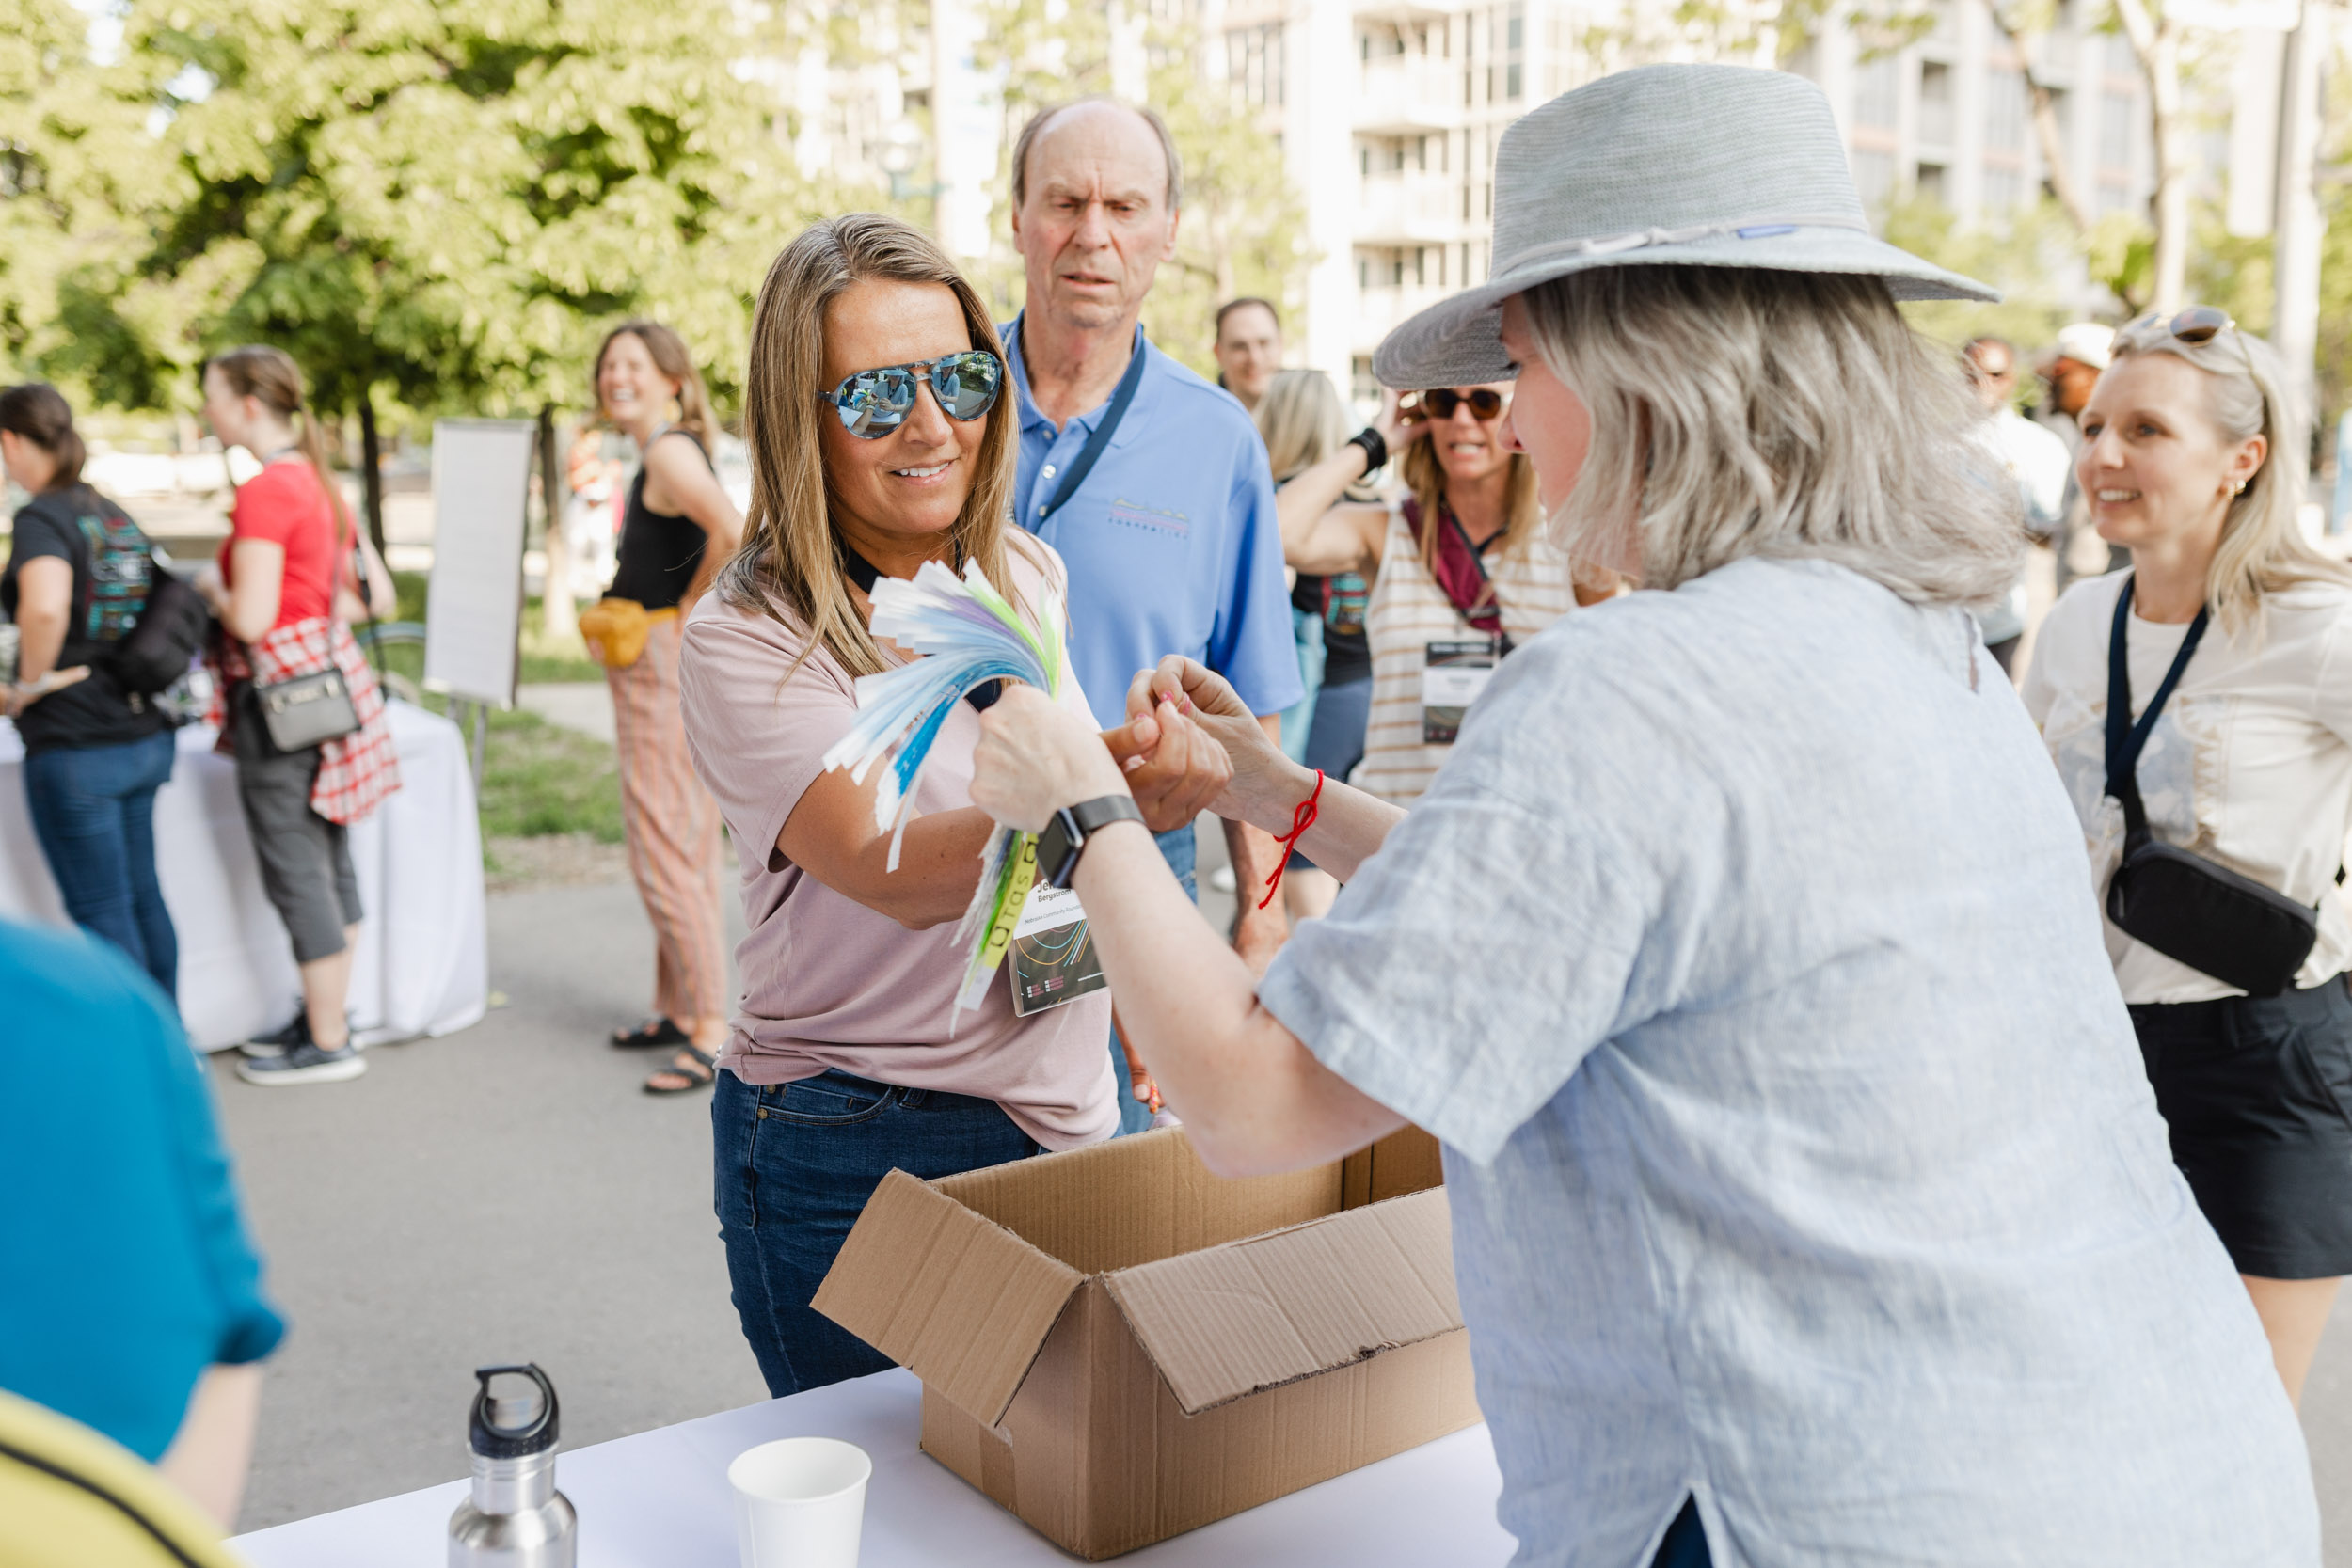 Conference Photography: Woman giving a box to another woman during an outdoor event.